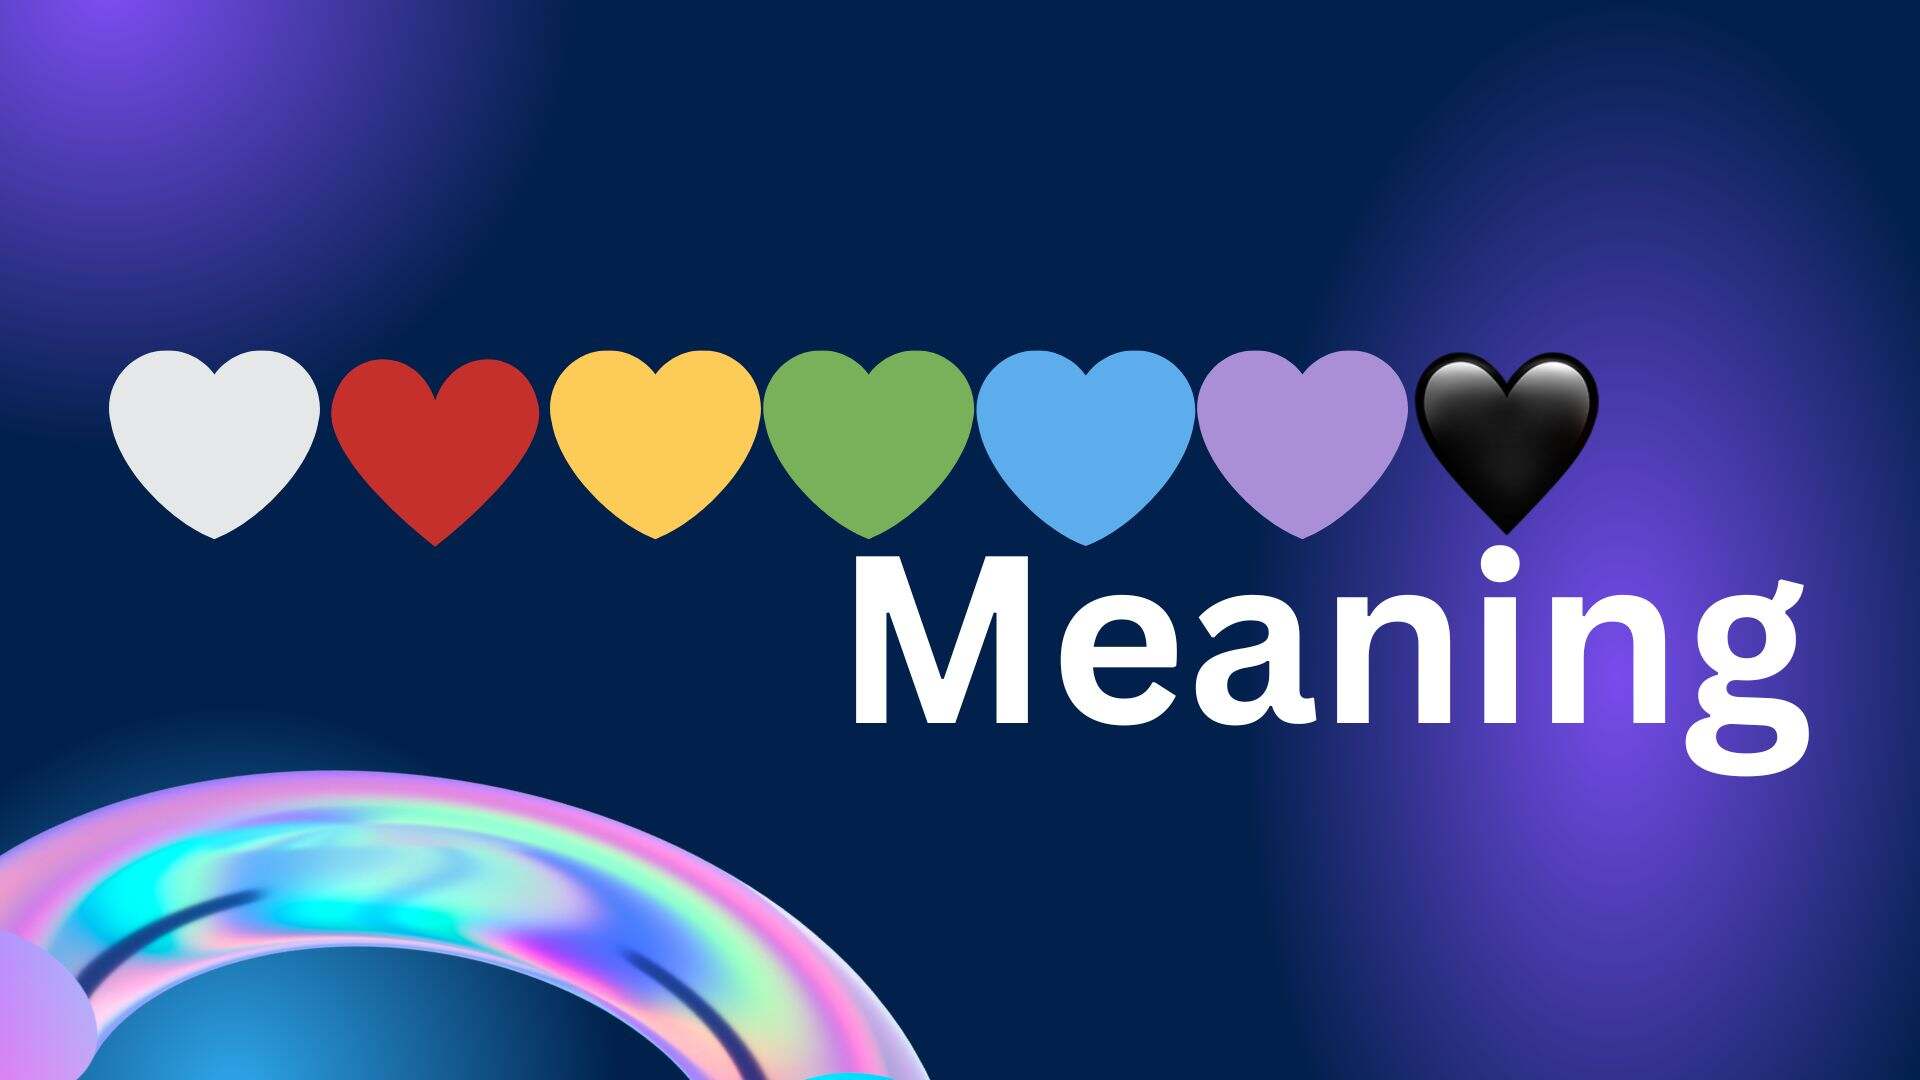 ❤🧡💛💚💙💜🖤 meaning